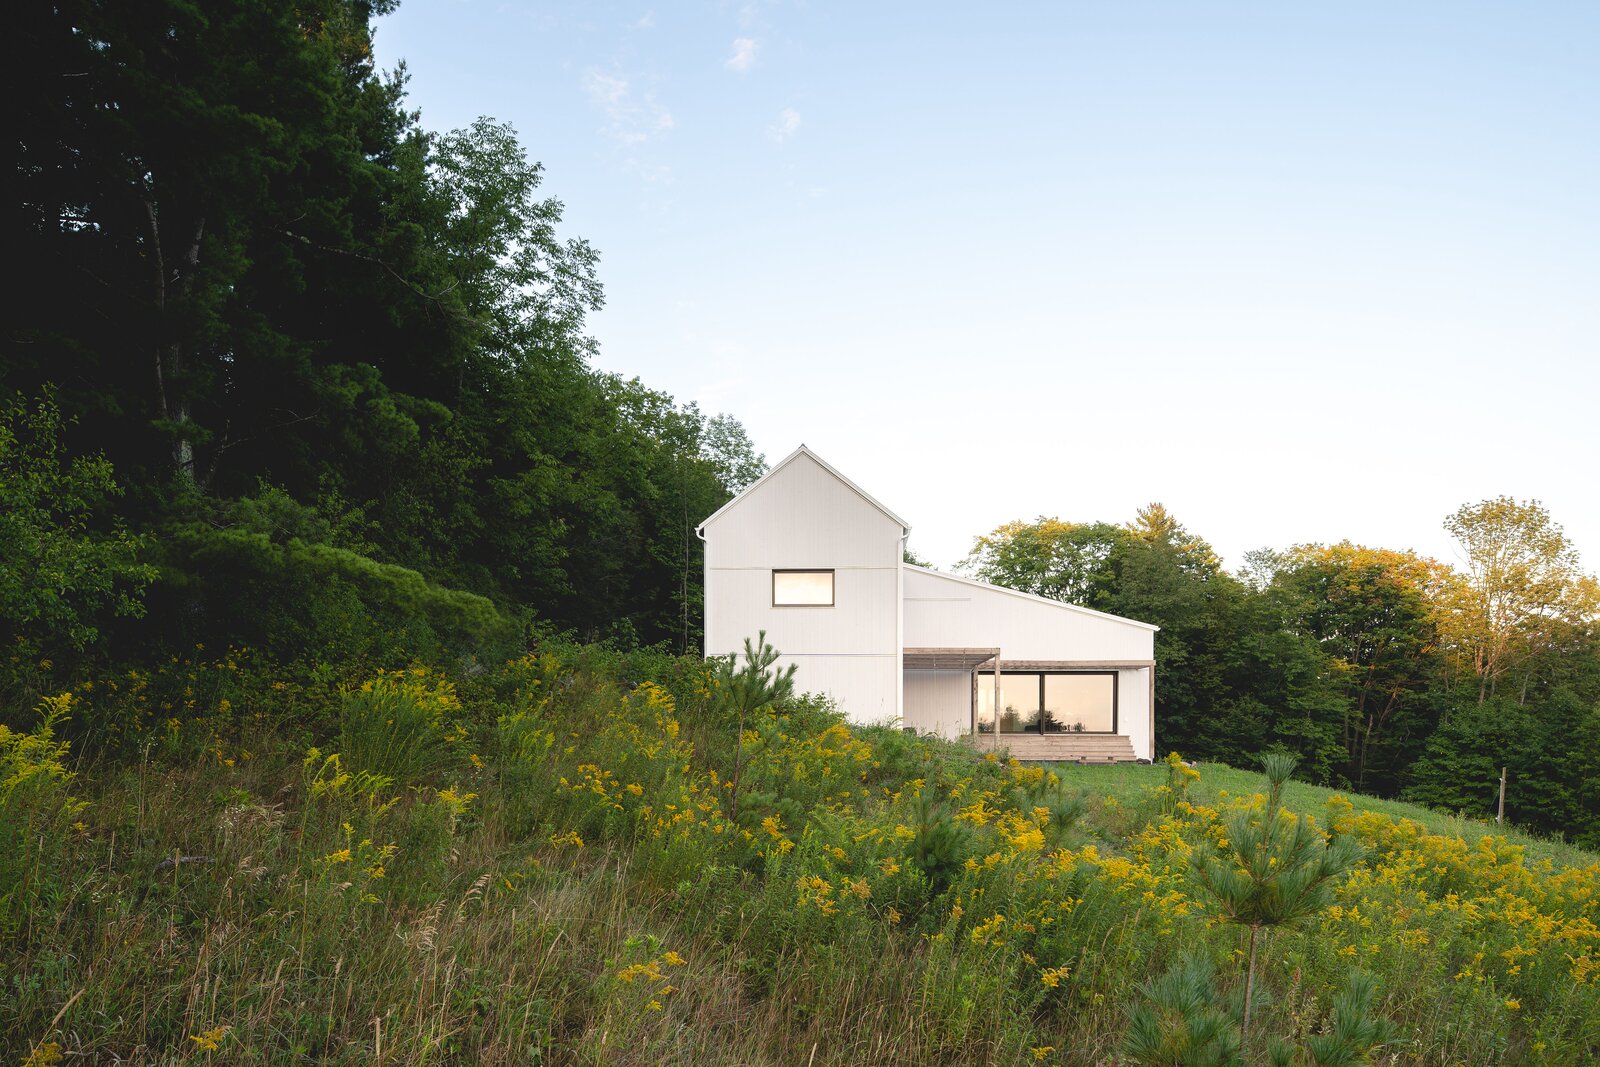 This Saltbox House Was Inspired by a Family’s Favorite Barbecue Grill